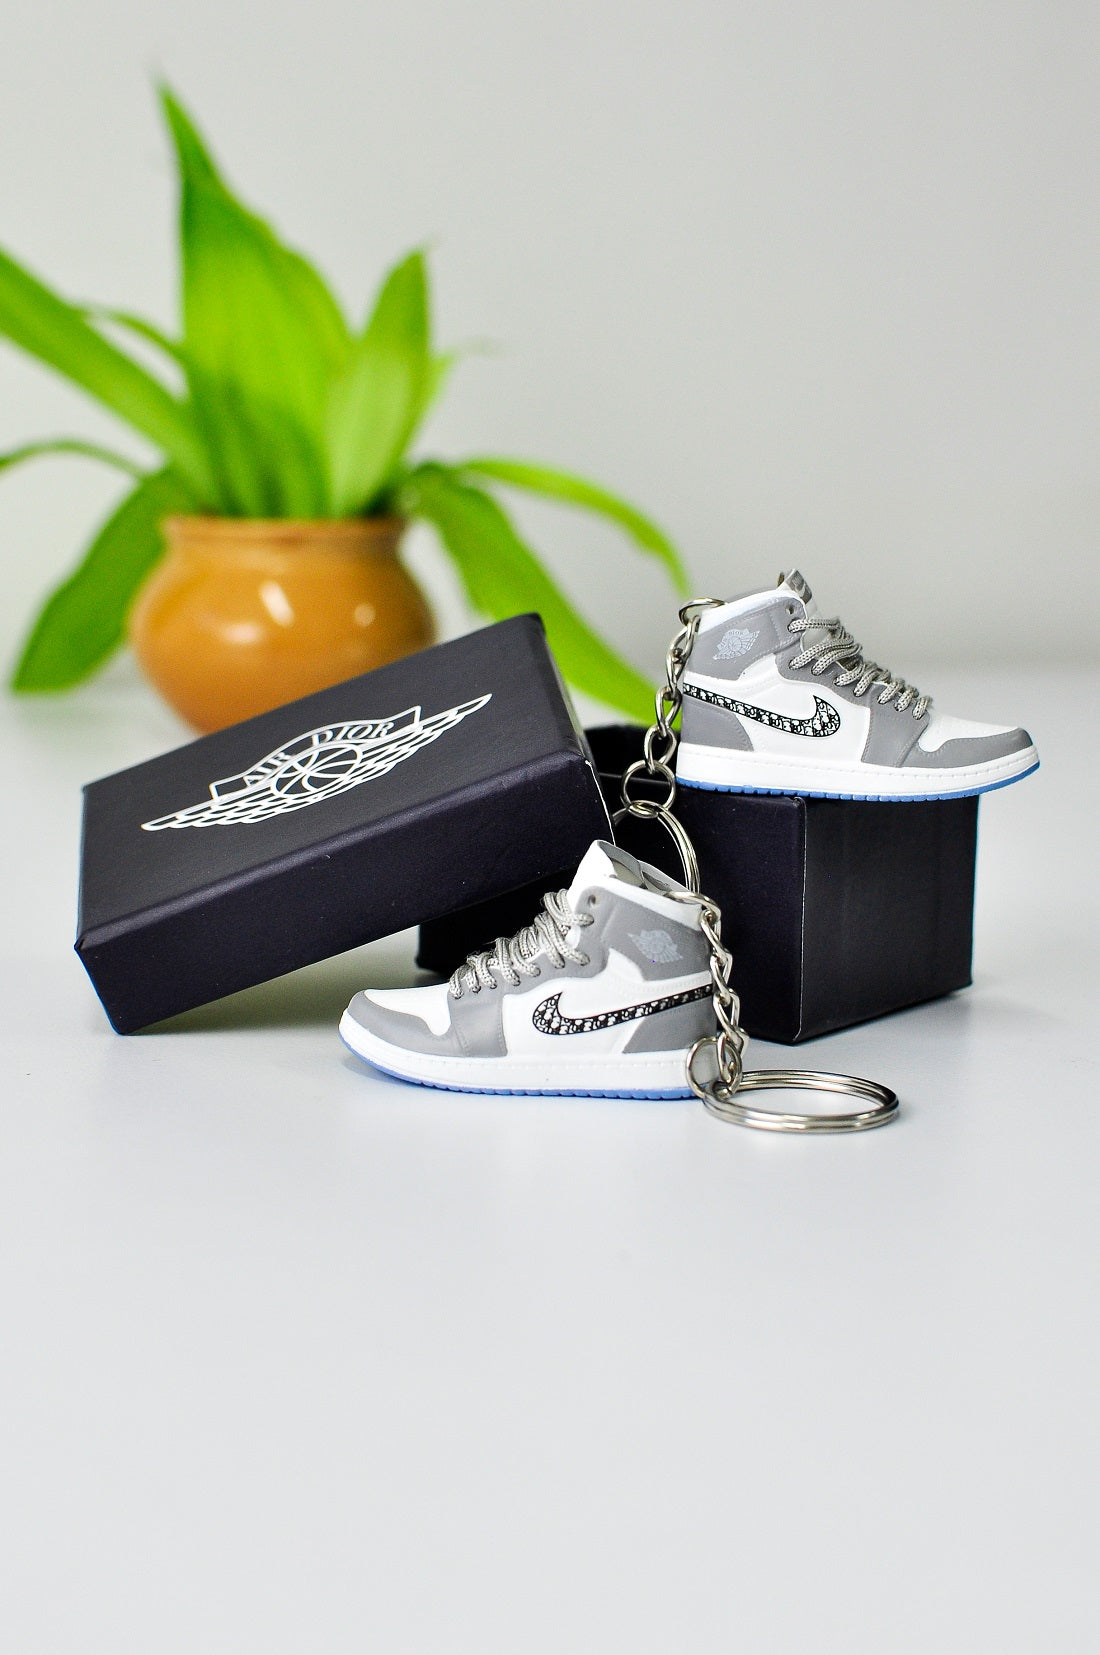 3D Sneaker Keychain With Box - Dior high